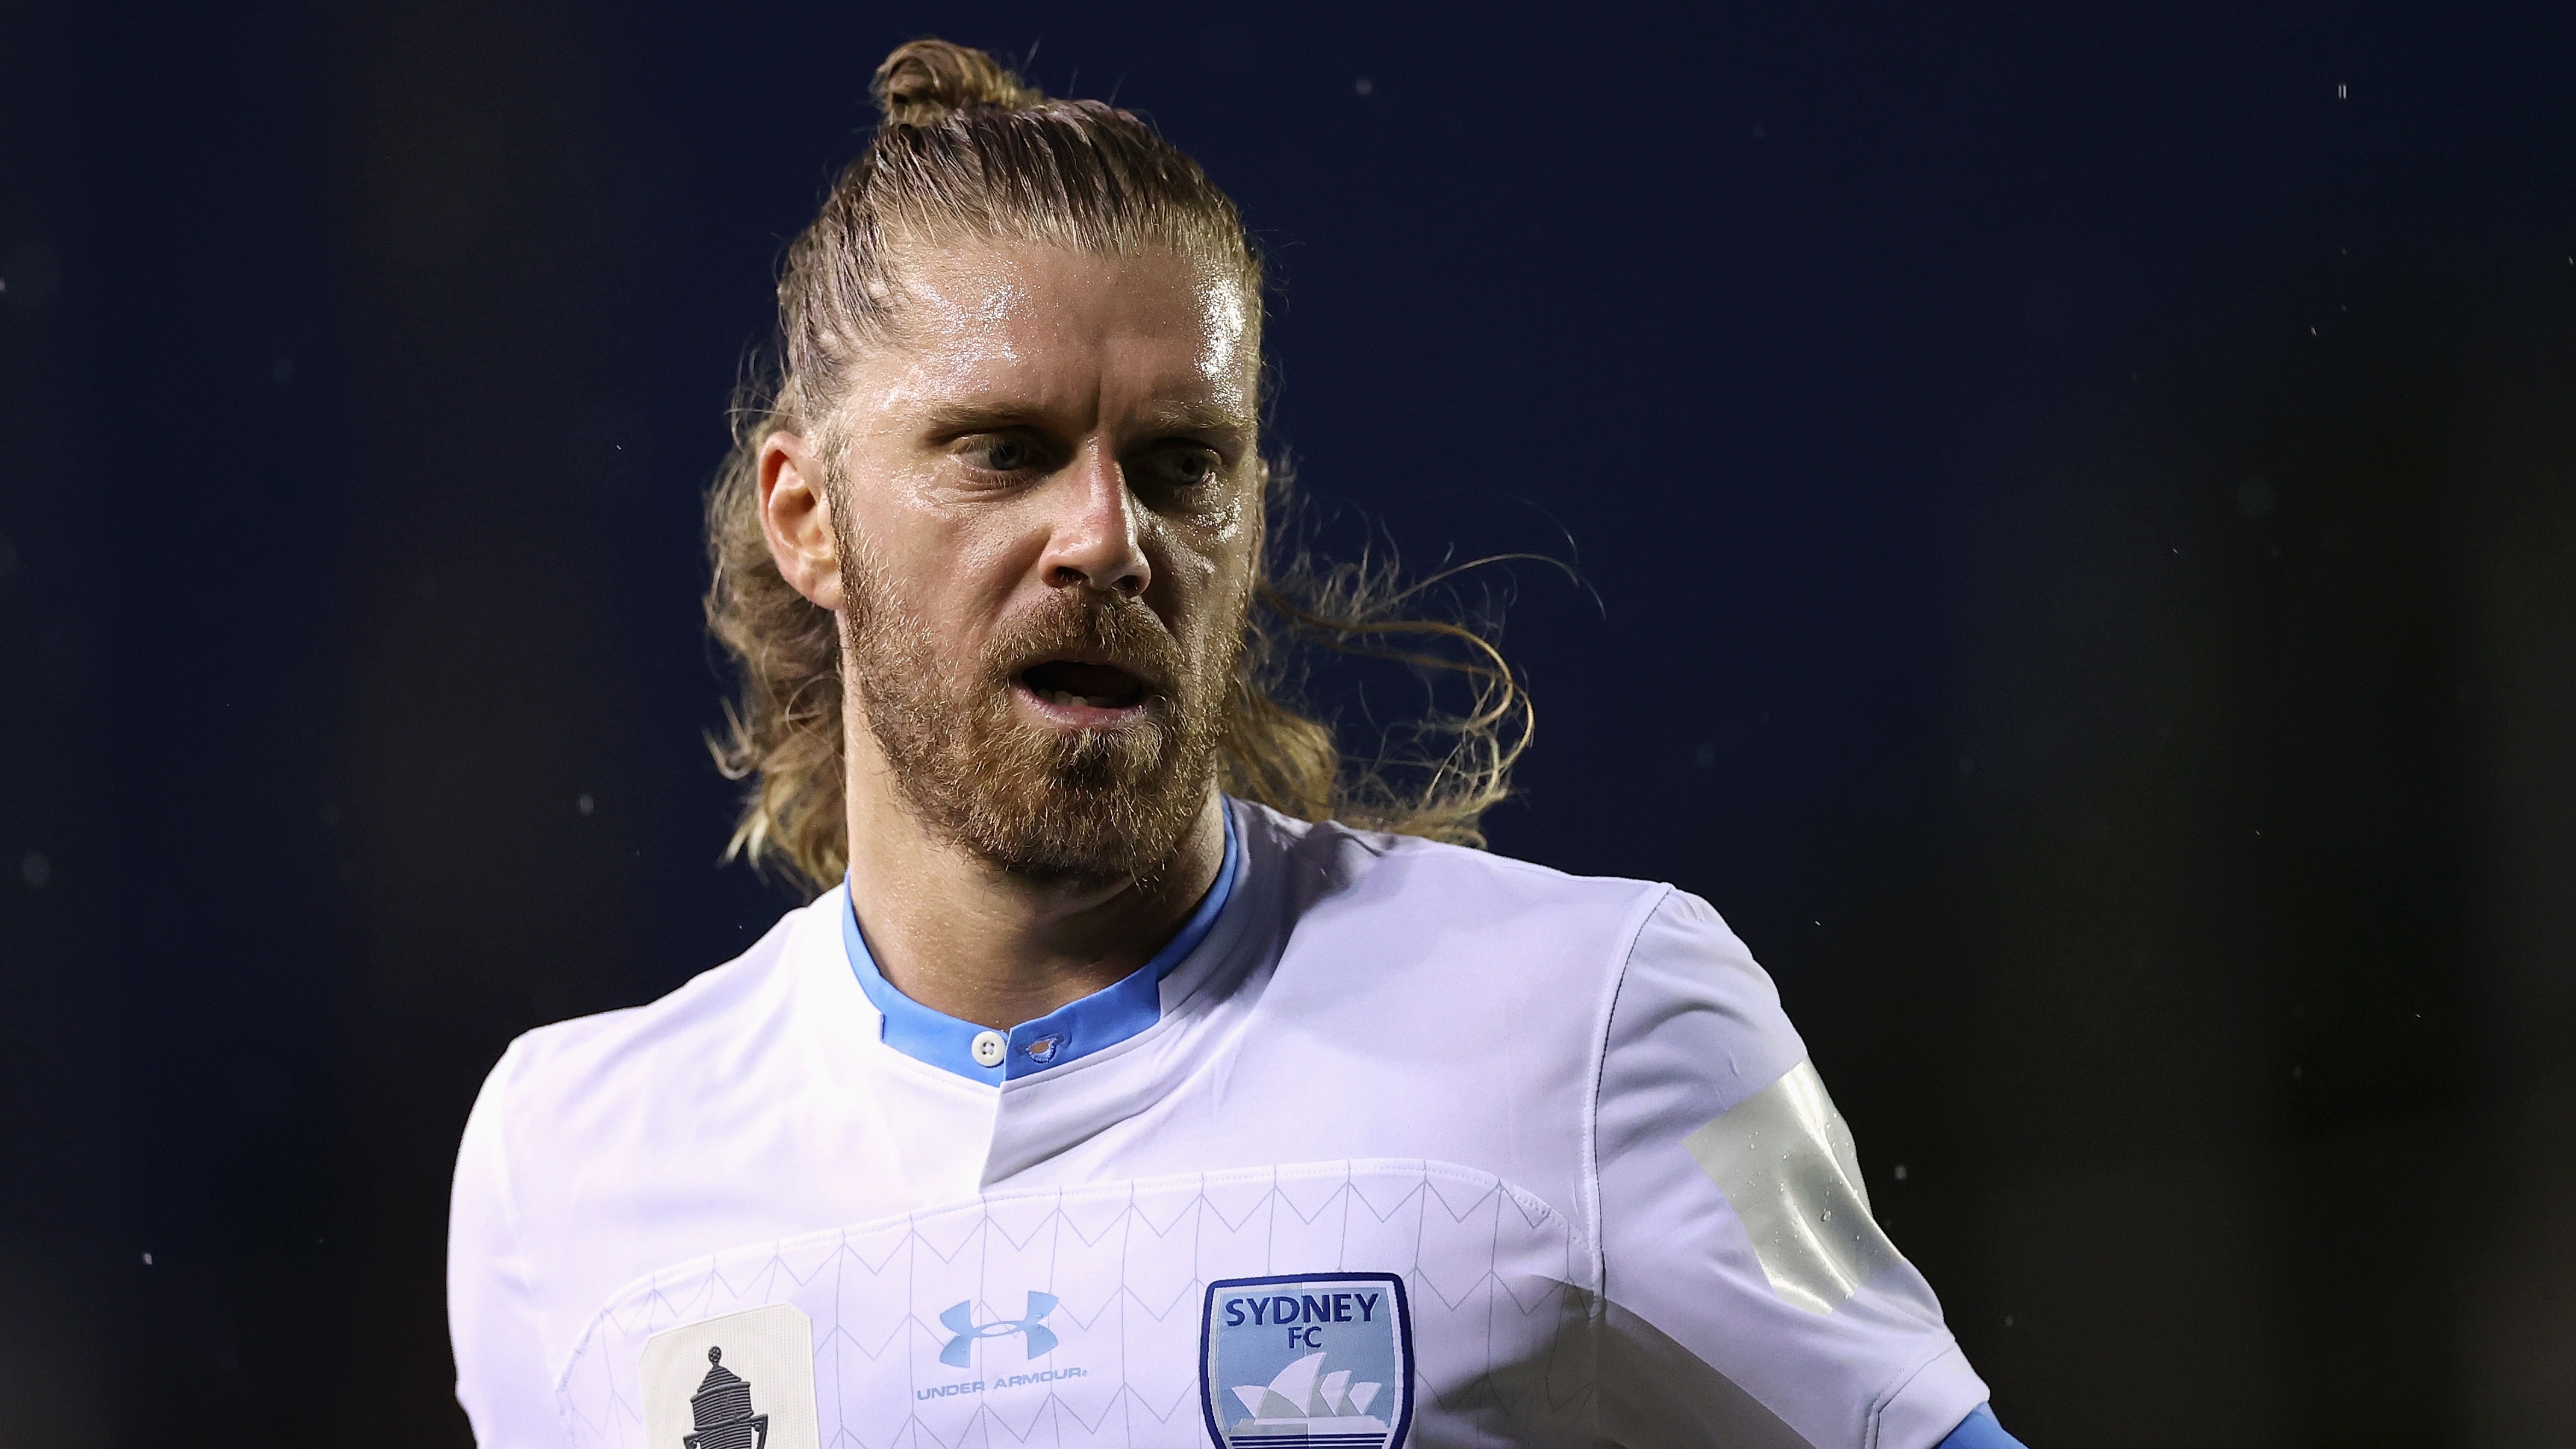 <div>Sydney FC re-sign 'one of the best midfielders in the country'</div>